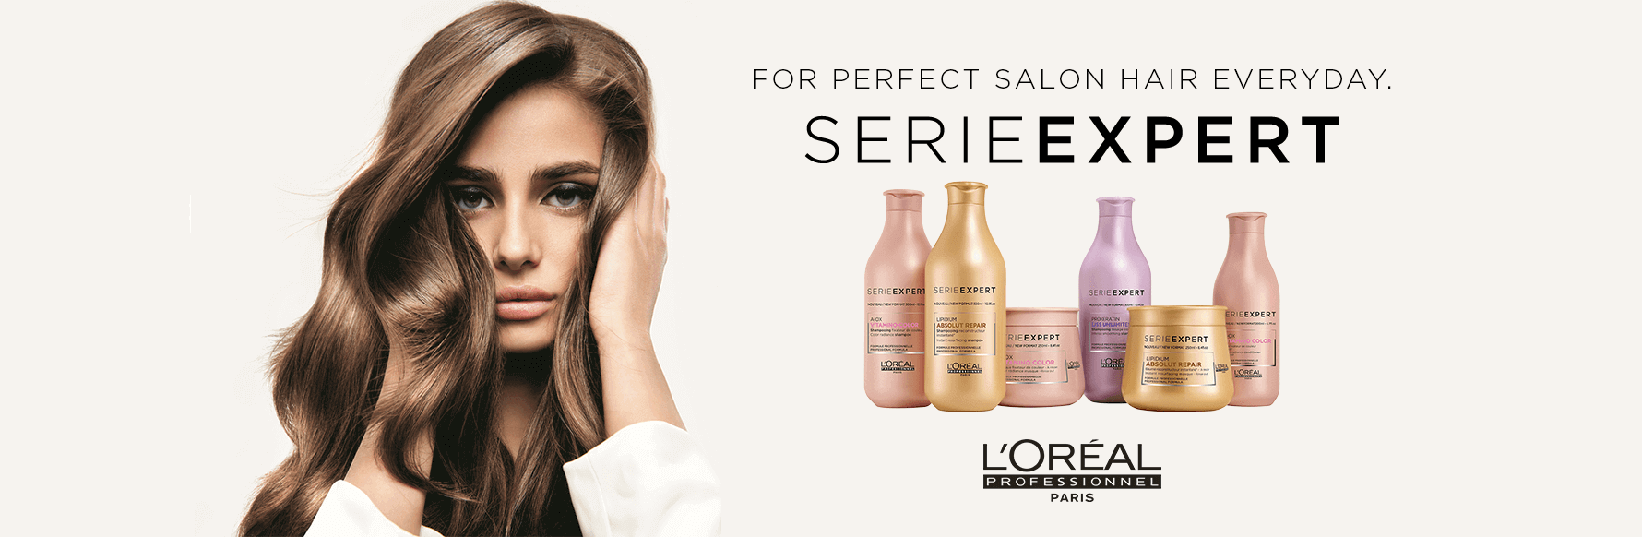 LOreal Professionnel banner s